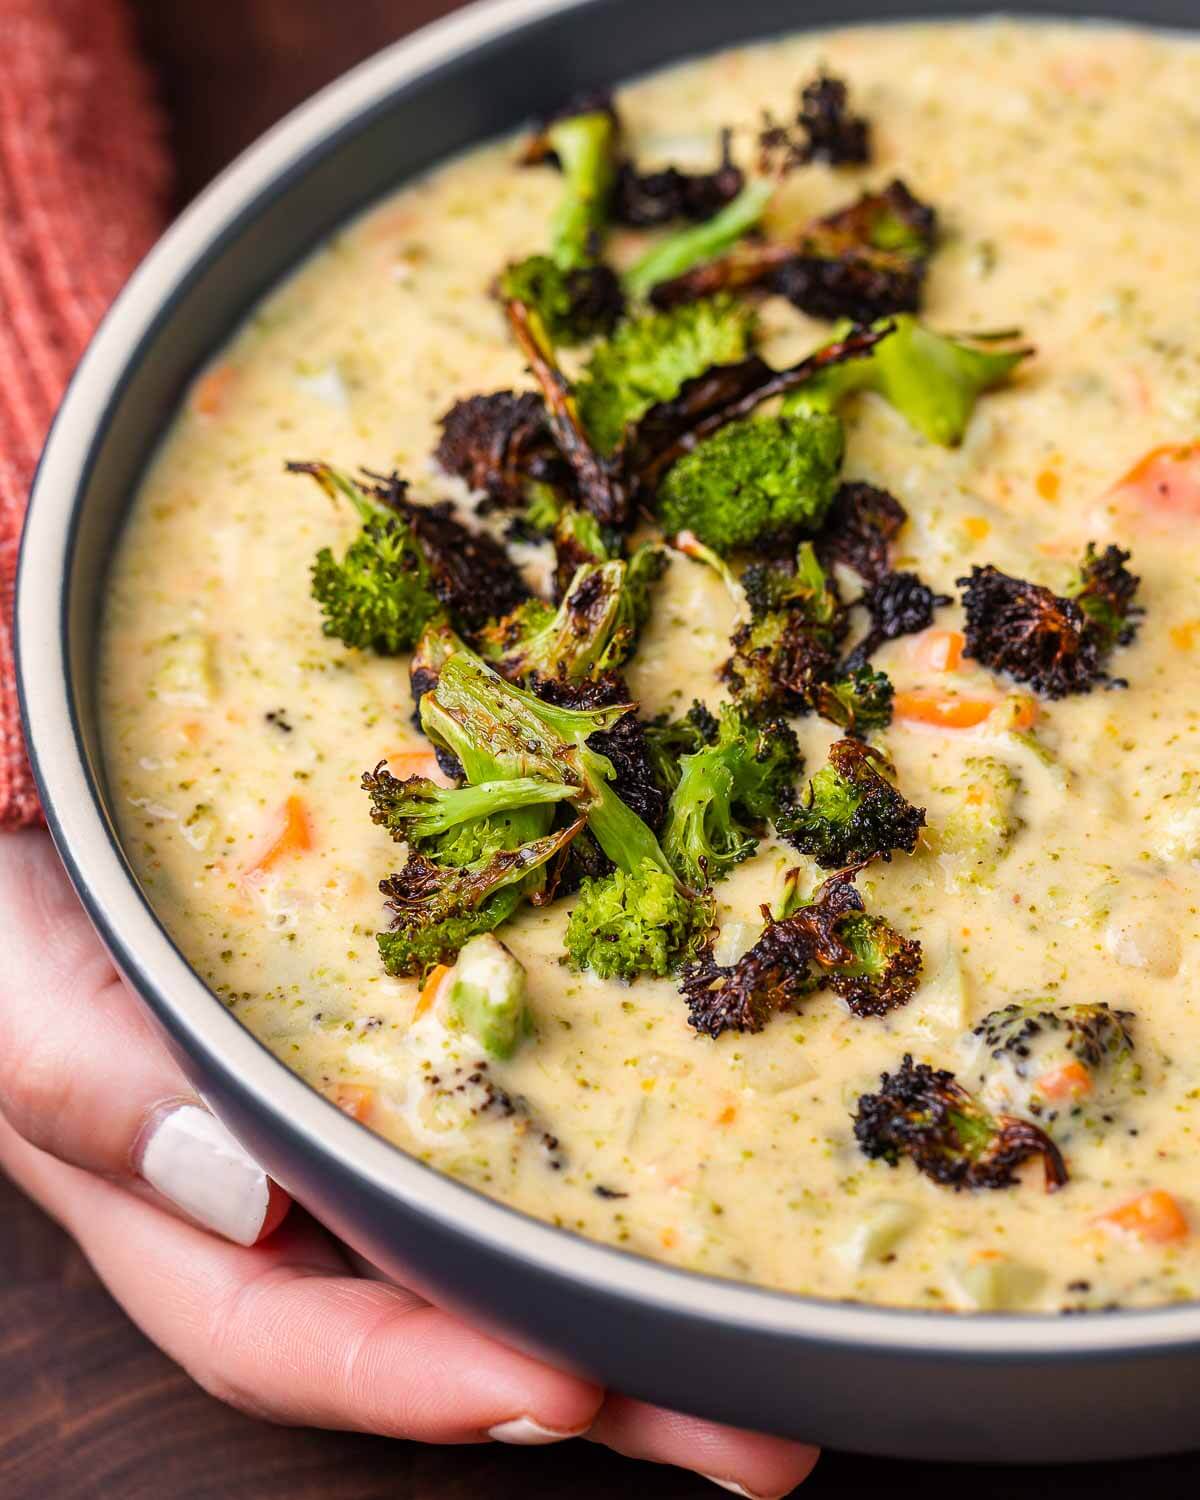 Hands holding bowl of broccoli cheddar soup.